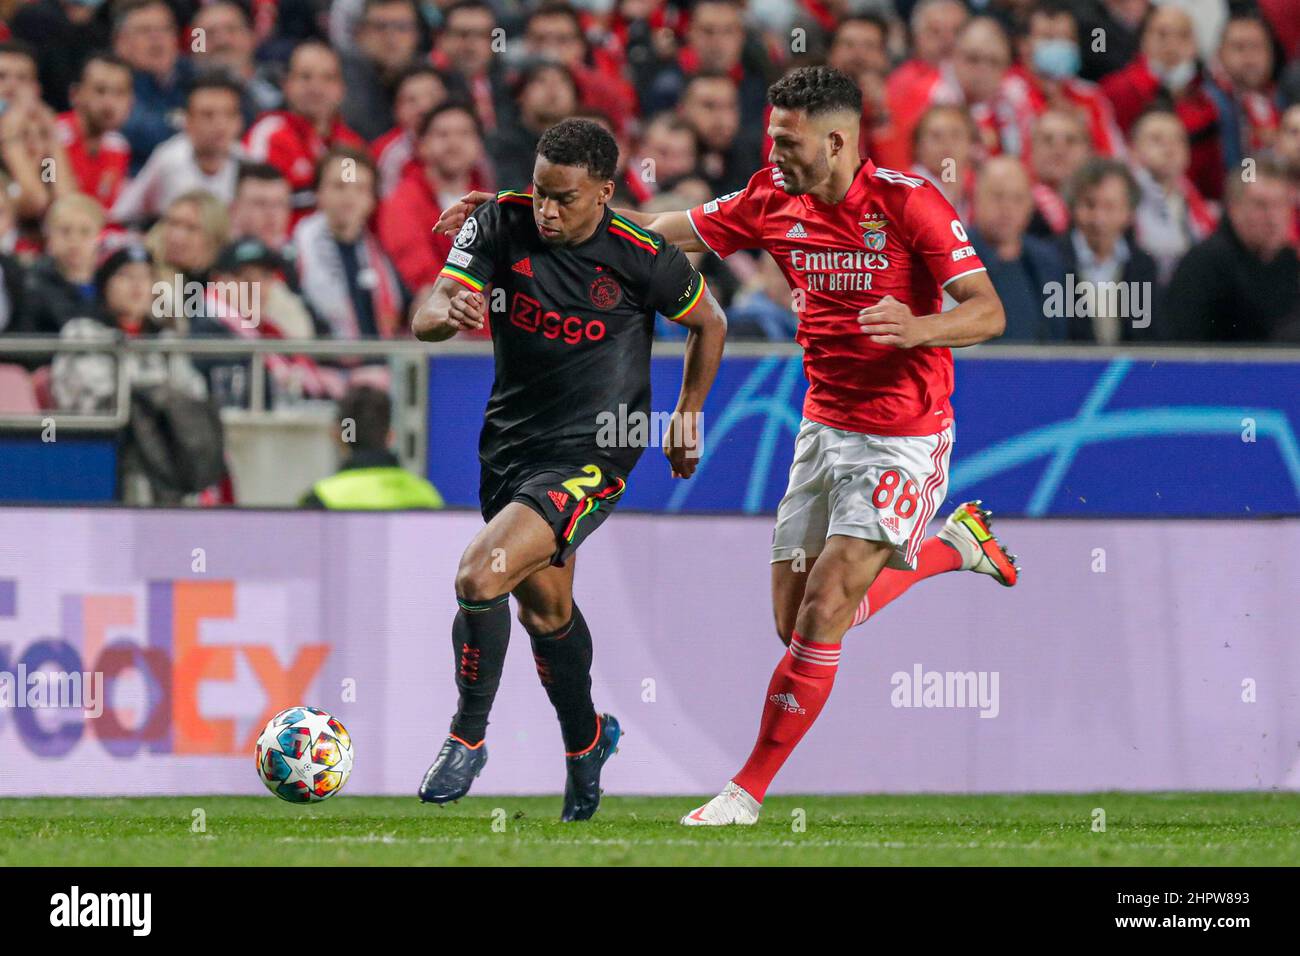 LISBON, PORTUGAL - FEBRUARY 23: Jurrien Timber of Ajax, Goncalo Ramos of SL Benfica during the UEFA Champions League match between SL Benfica and AFC Ajax at Estadio do SL Benfica on February 23, 2022 in Lisbon, Portugal (Photo by Peter Lous/Orange Pictures) Stock Photo